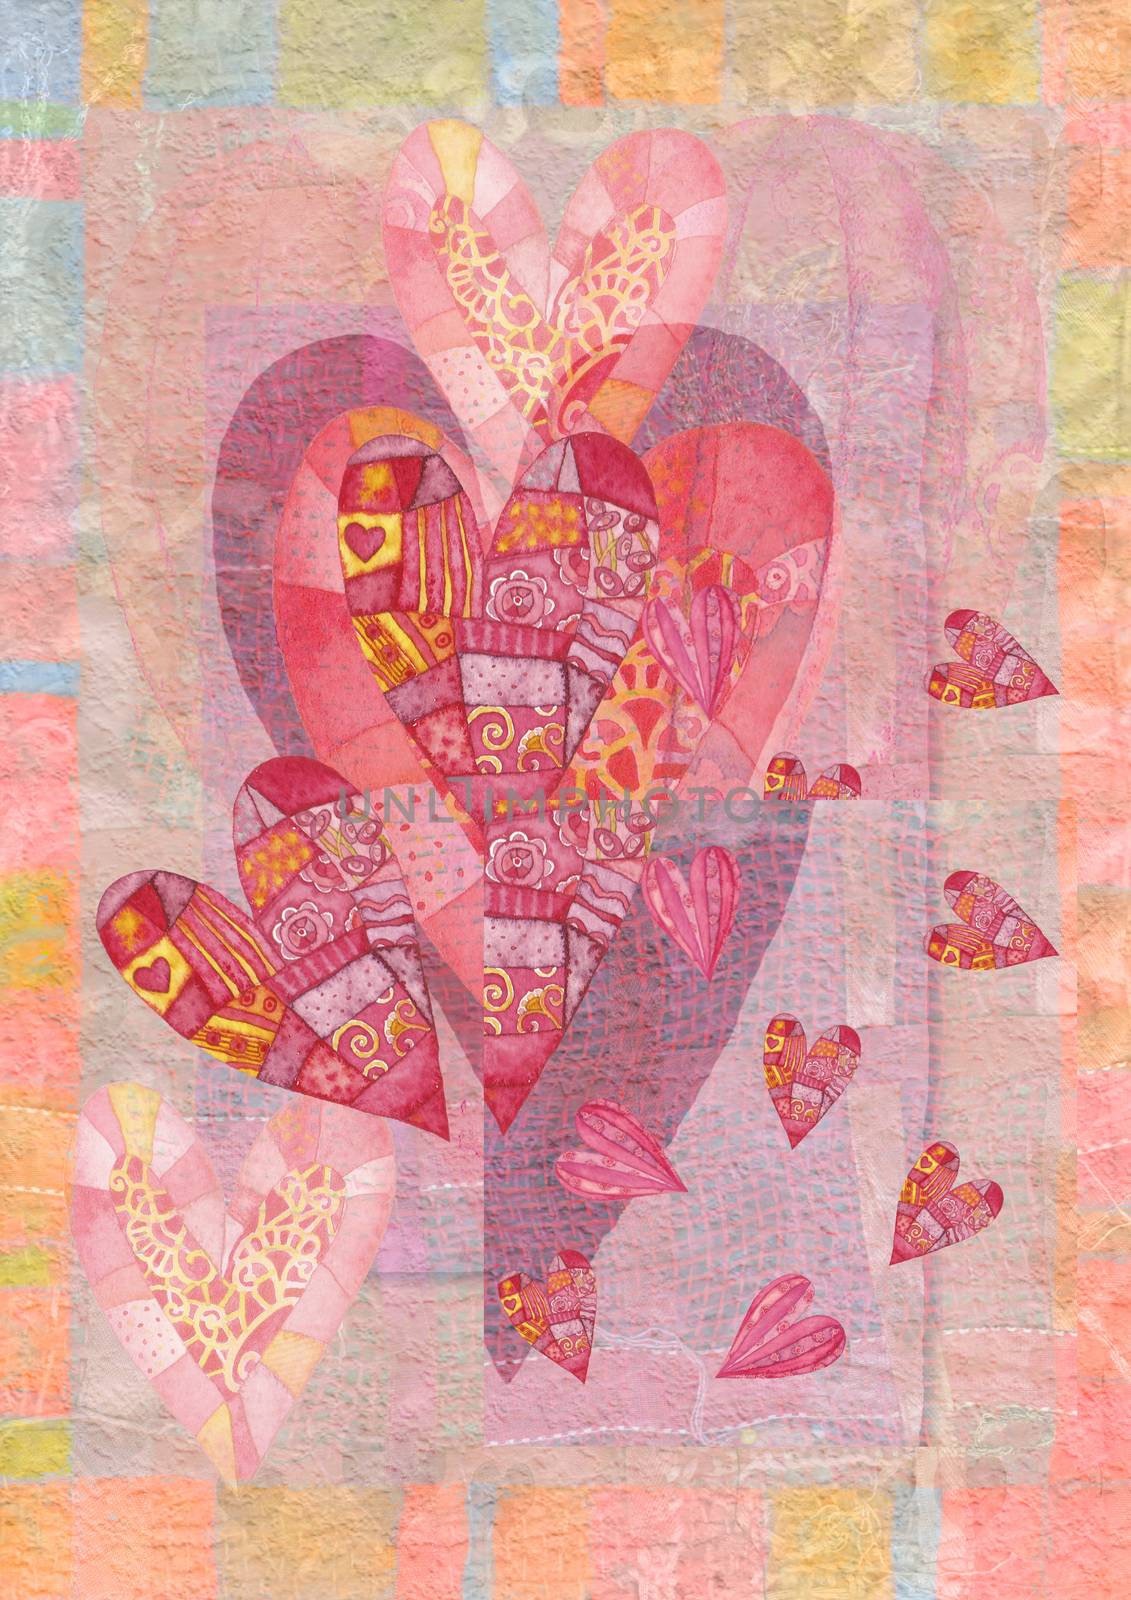 Heart, greeting card.  Colorful watercolor can be used for wallpaper, pattern fills, web page background, surface textures, textiles, cards, postcards